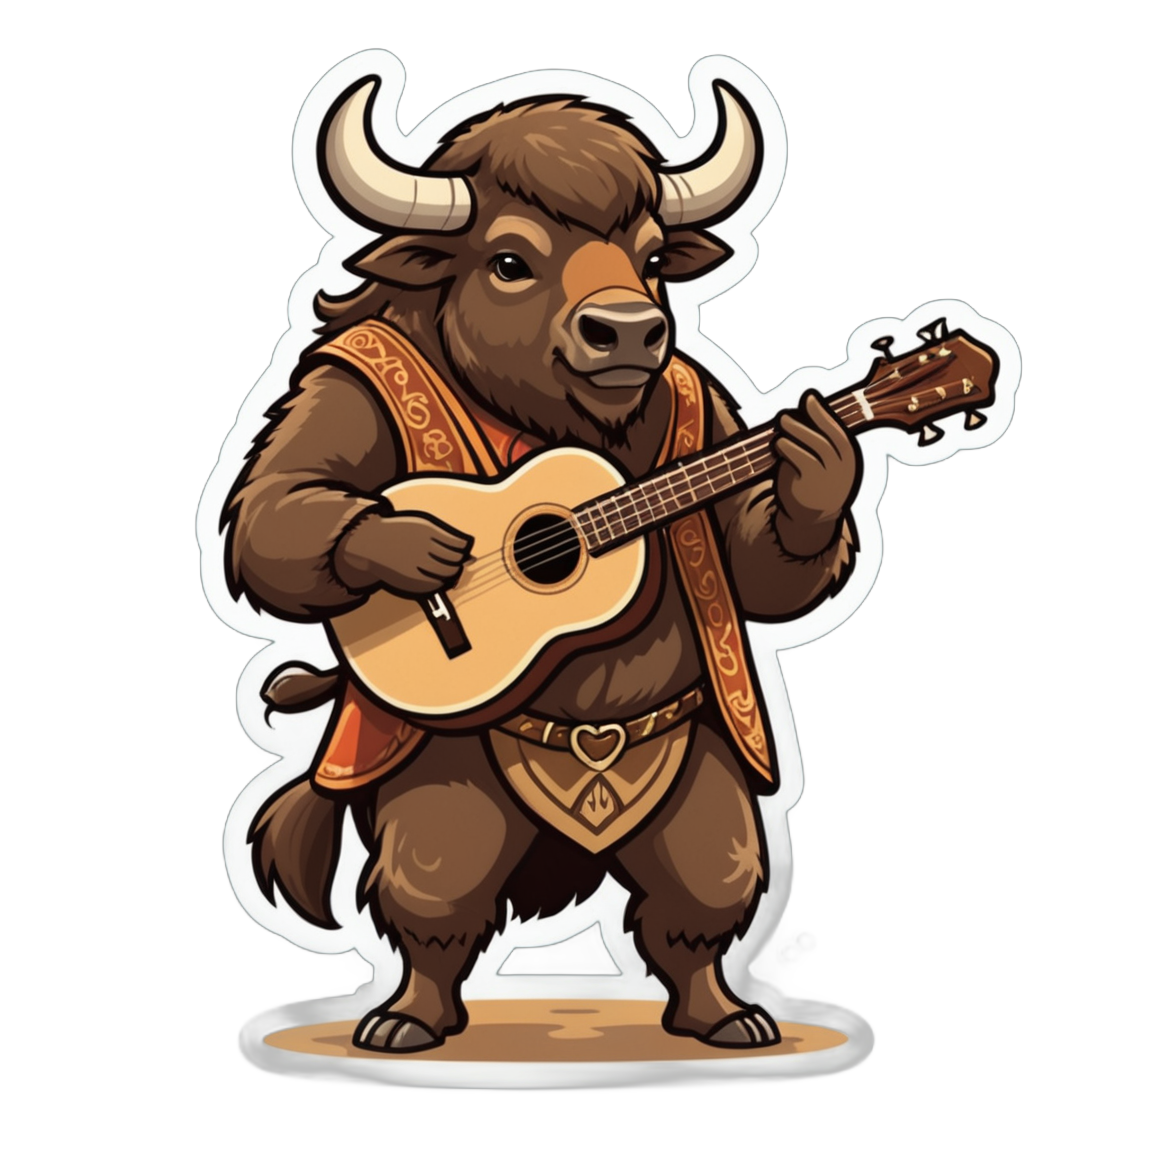 A bison as a Renaissance bard, with a guitar in hand, and a troubadour’s hat